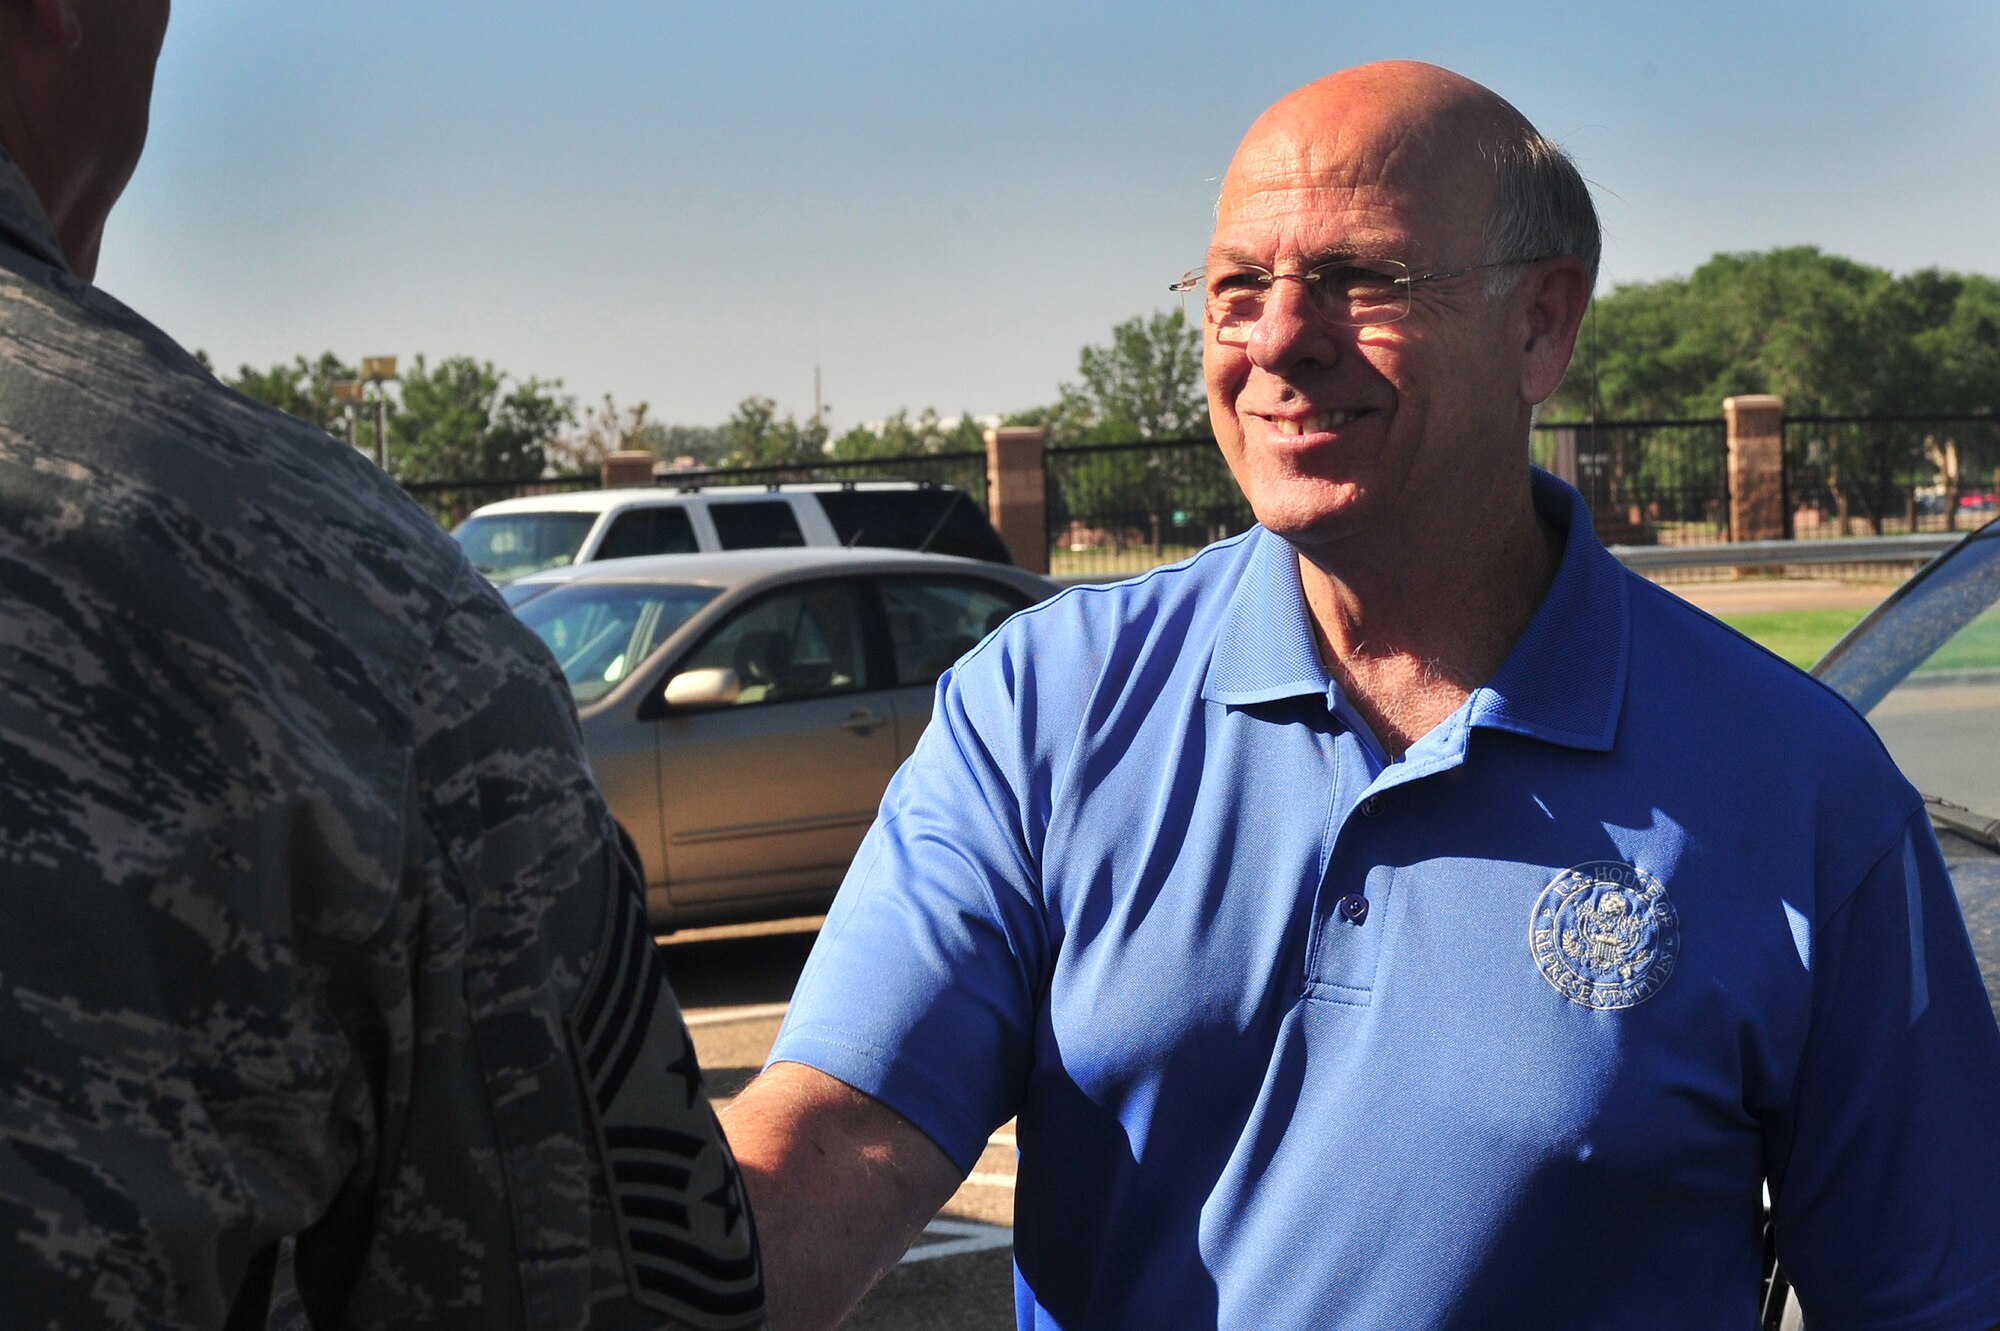 U.S. Congressman Steve Pearce, 2nd district representative of New Mexico, meets with U.S. Air Force Chief Master Sgt. Paul Henderson, 27th Special Operations Wing command chief, during his visit Aug. 8, 2013 at Cannon Air Force Base, N.M. The purpose of his visit was to receive a comprehensive understanding of 27 SOW operations. (U.S. Air Force Photo/Airman 1st Class Xavier Lockley)